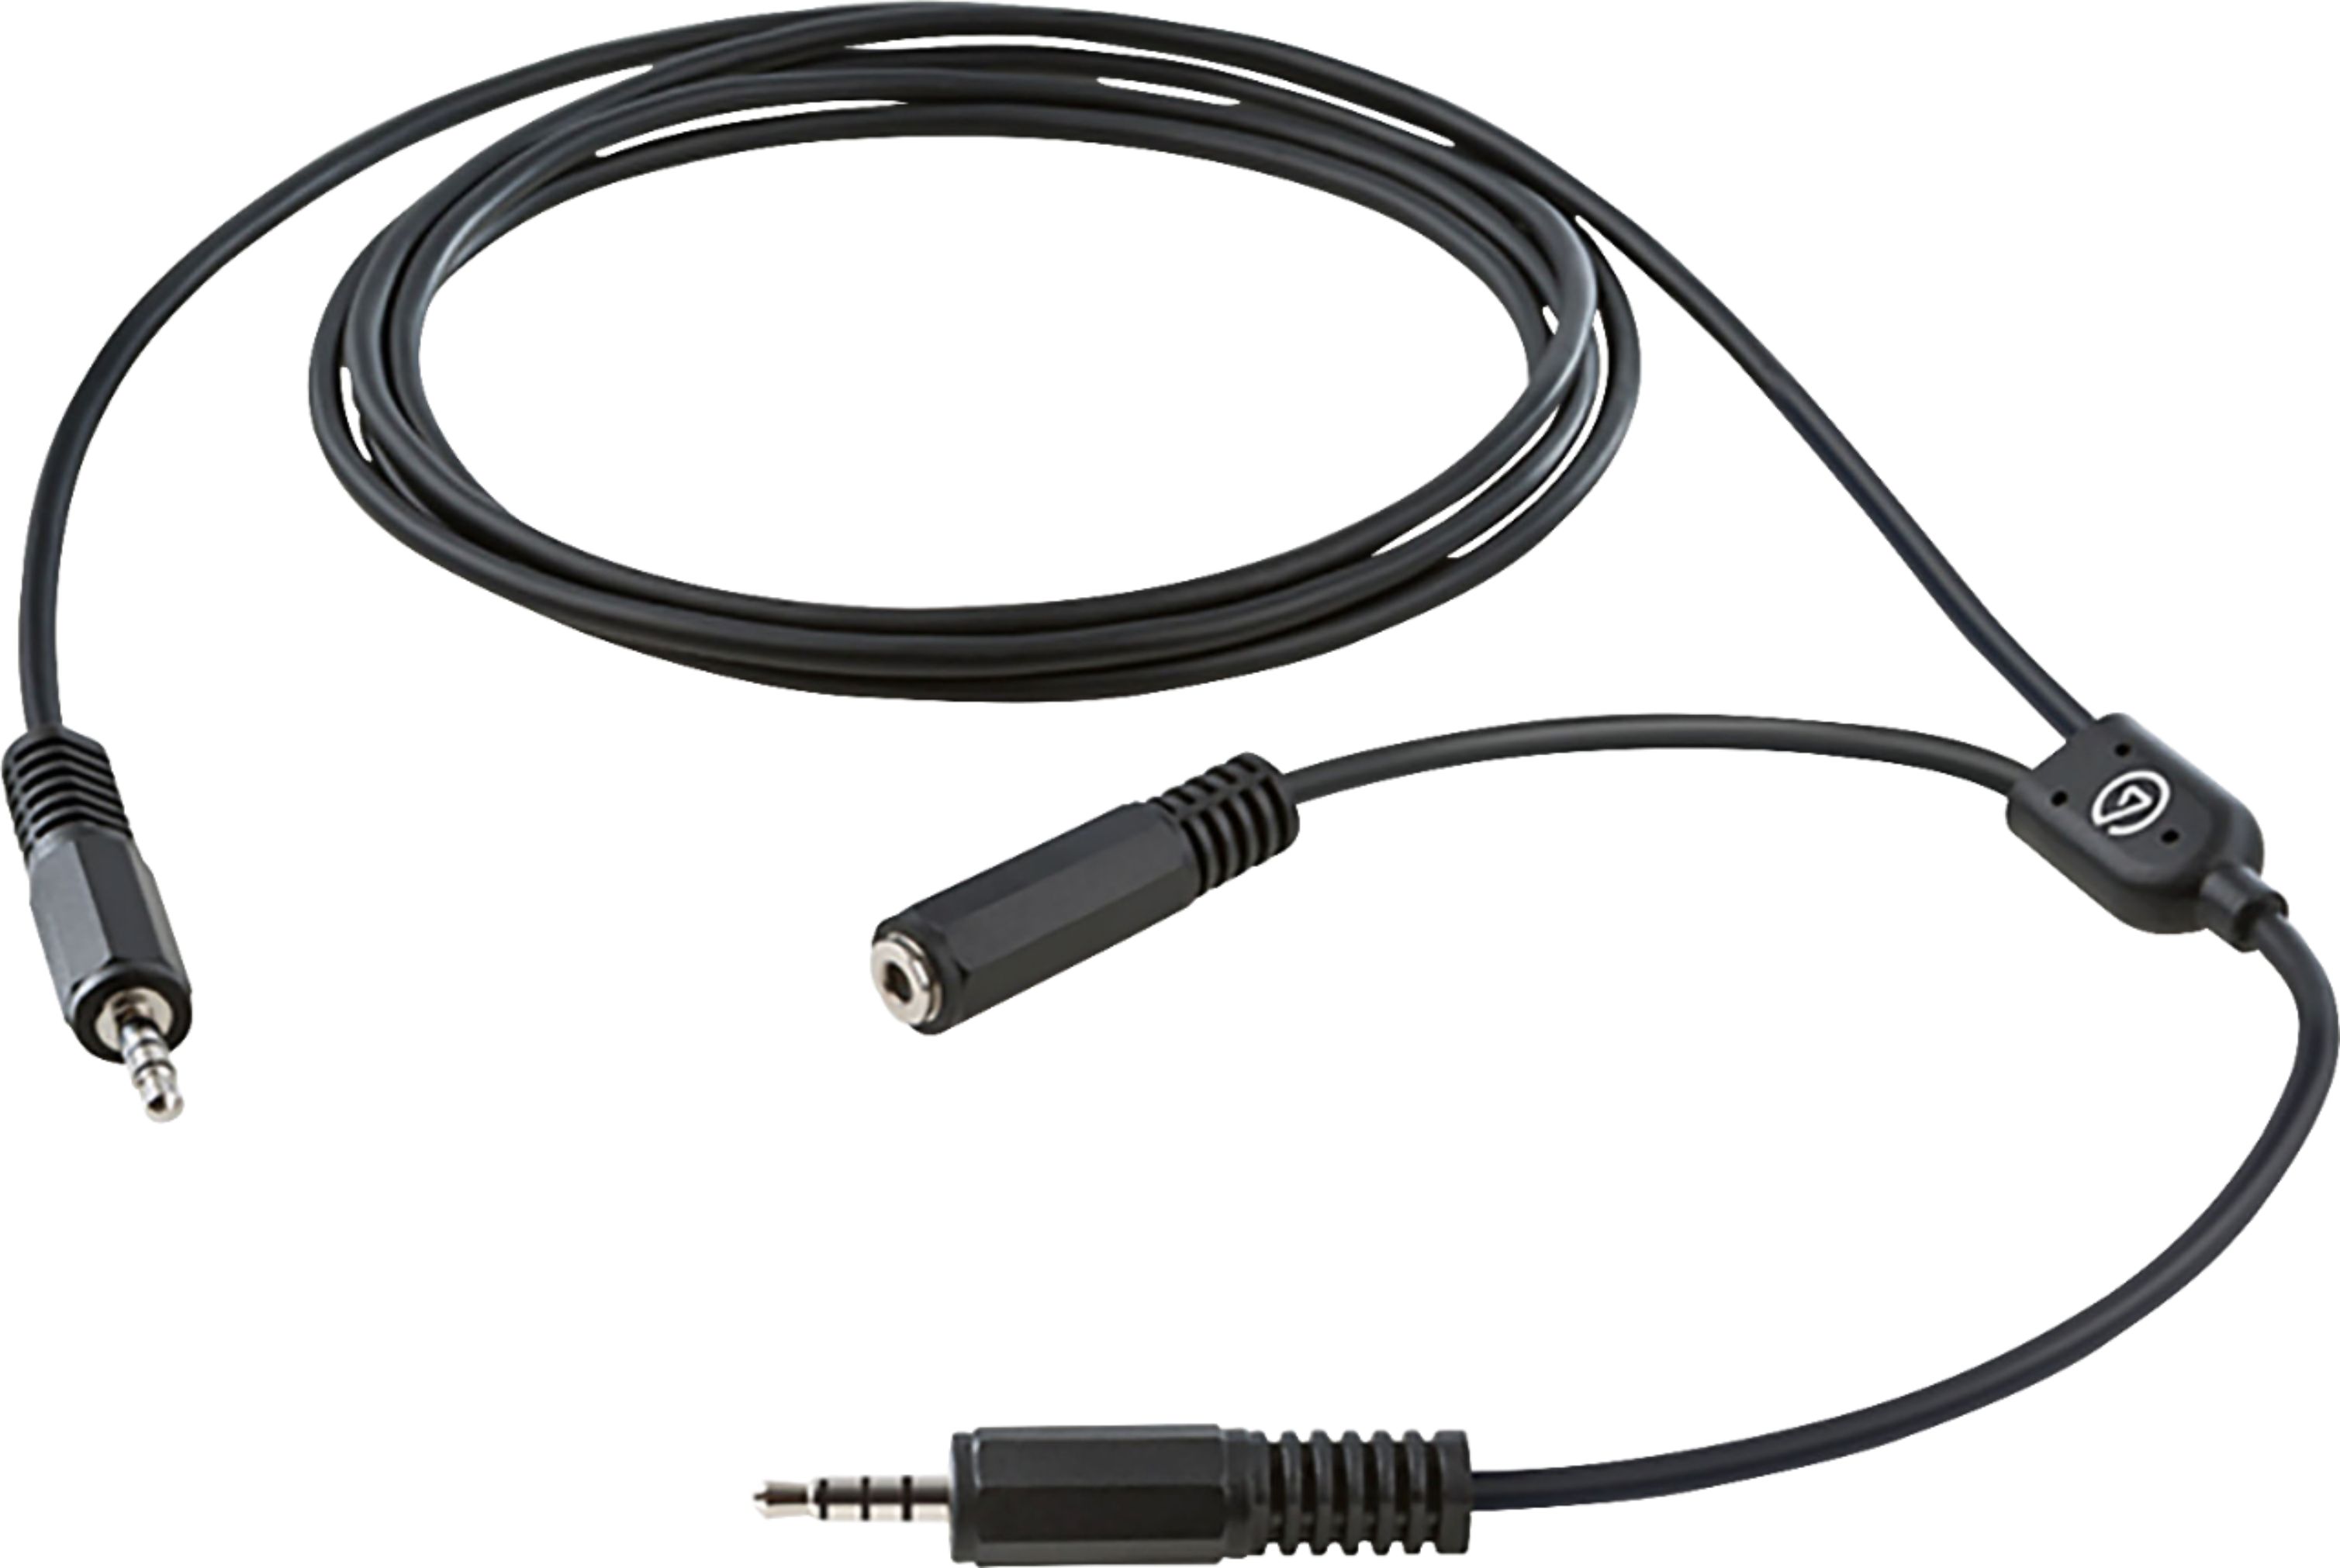 ps4 chat cable